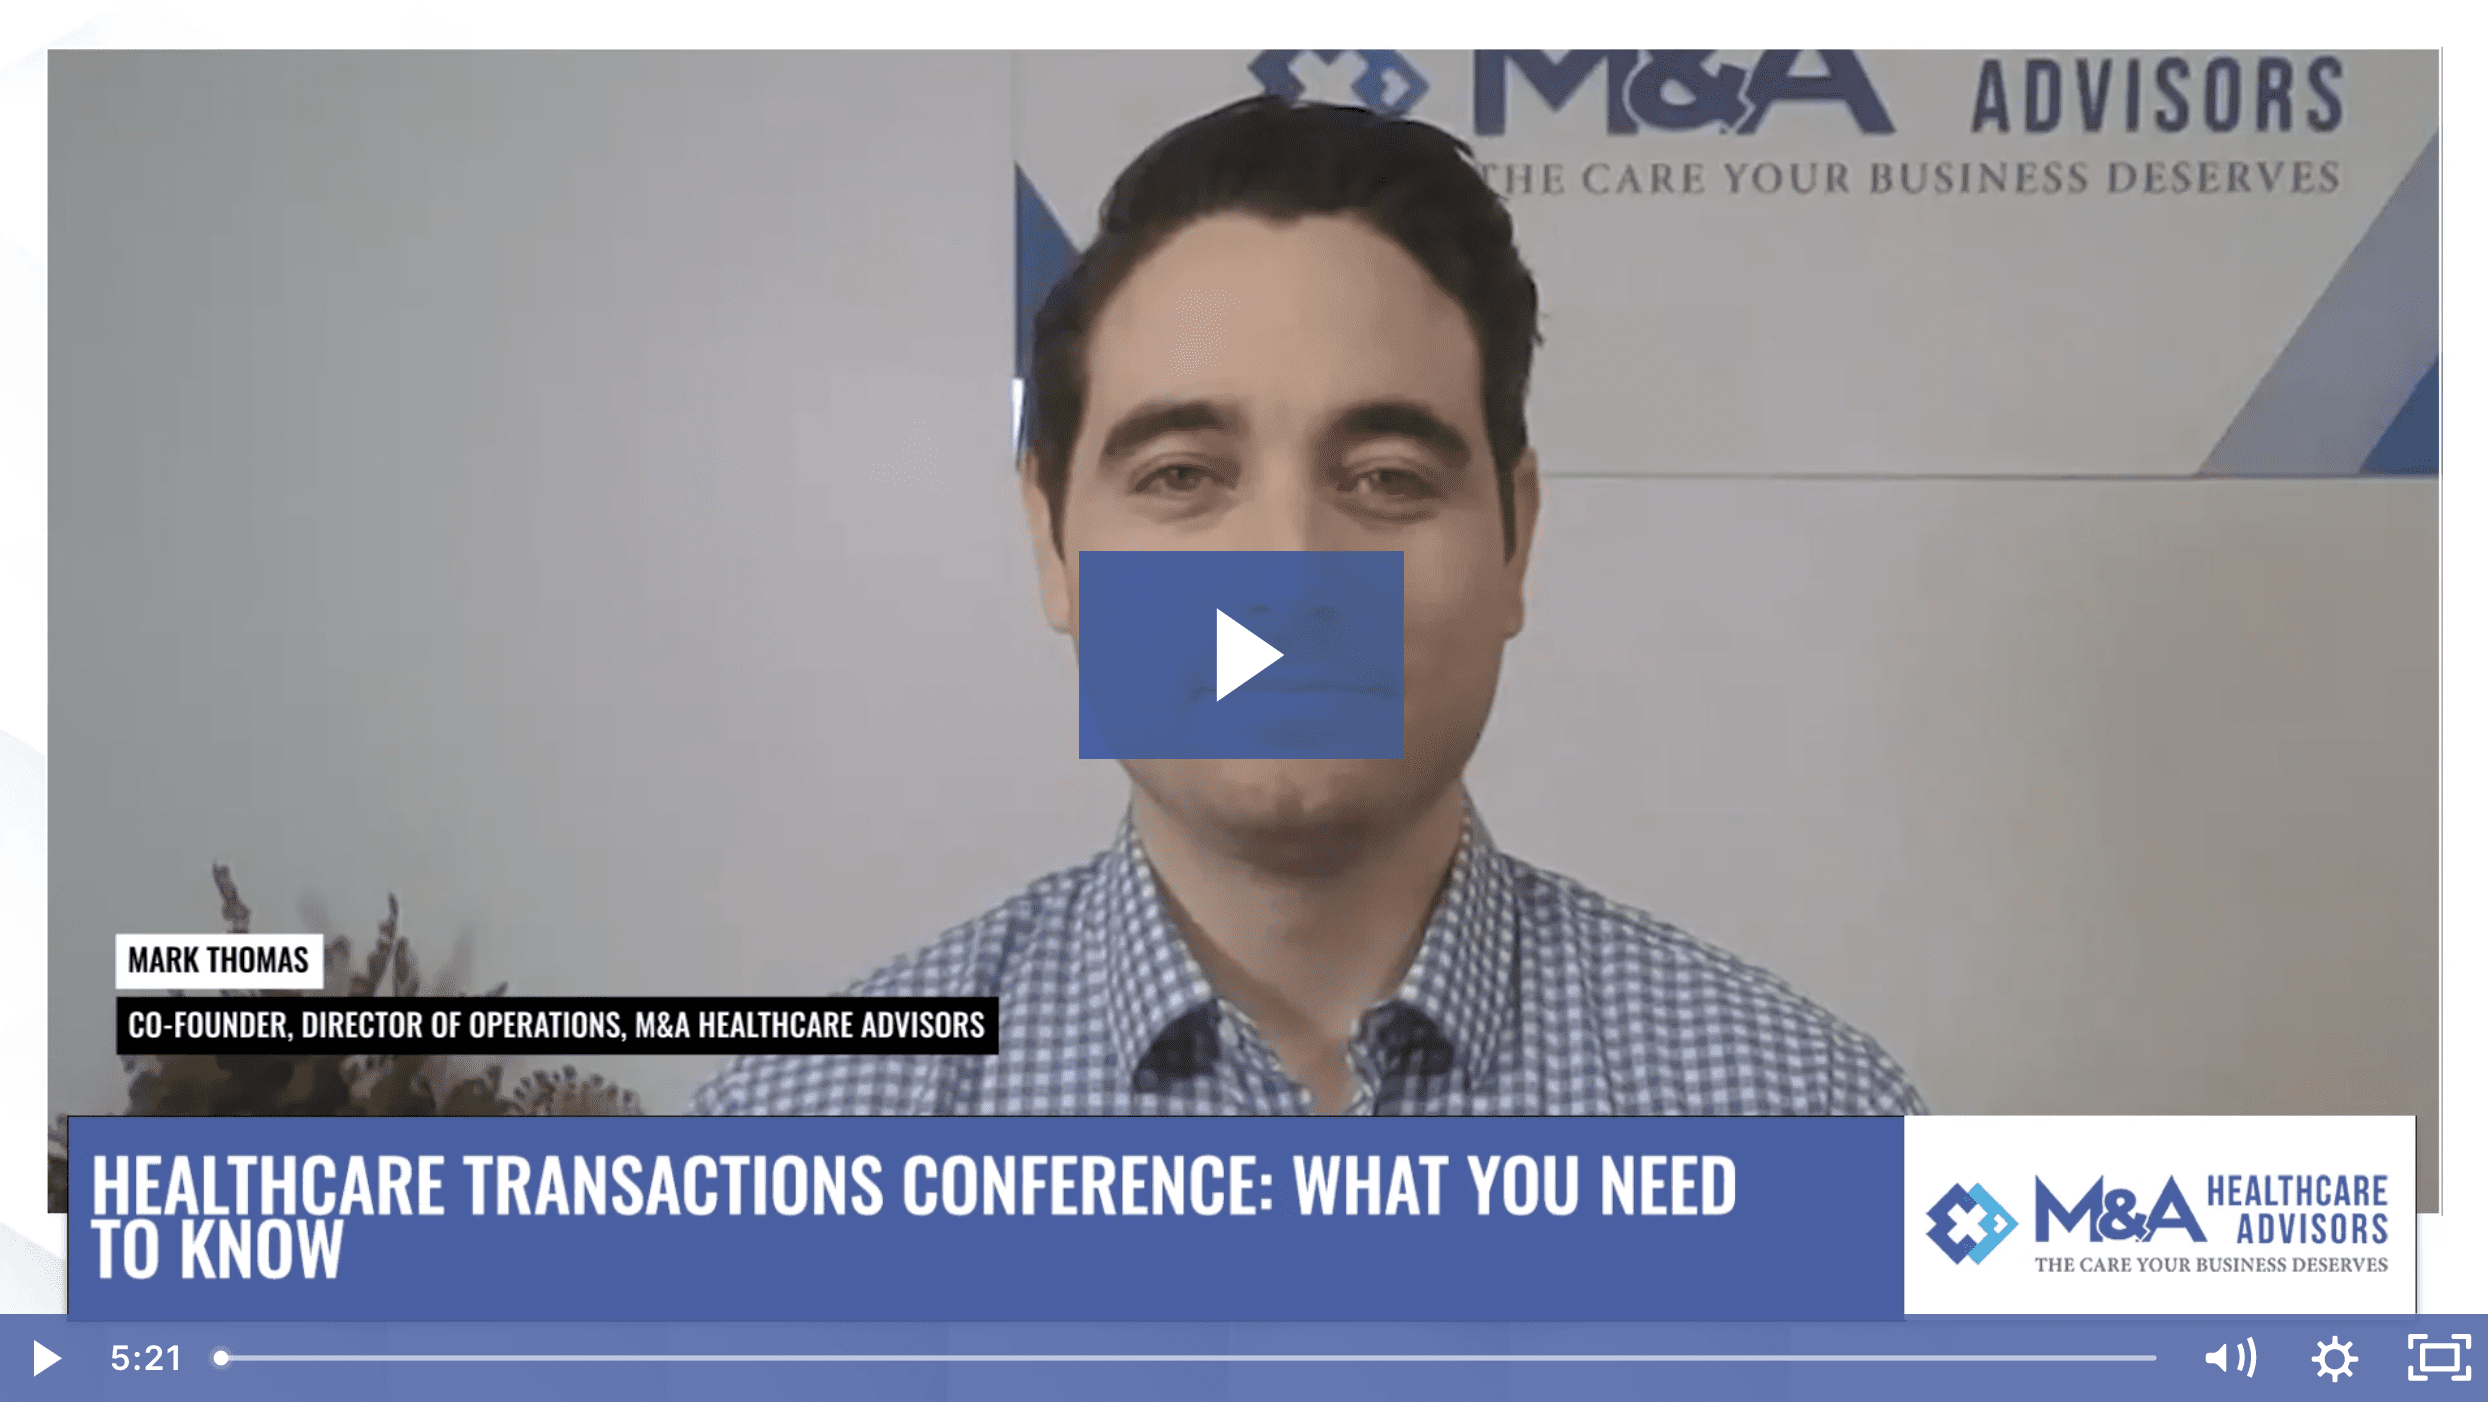 Video: 3 Key Takeaways from the Healthcare Transactions Conference